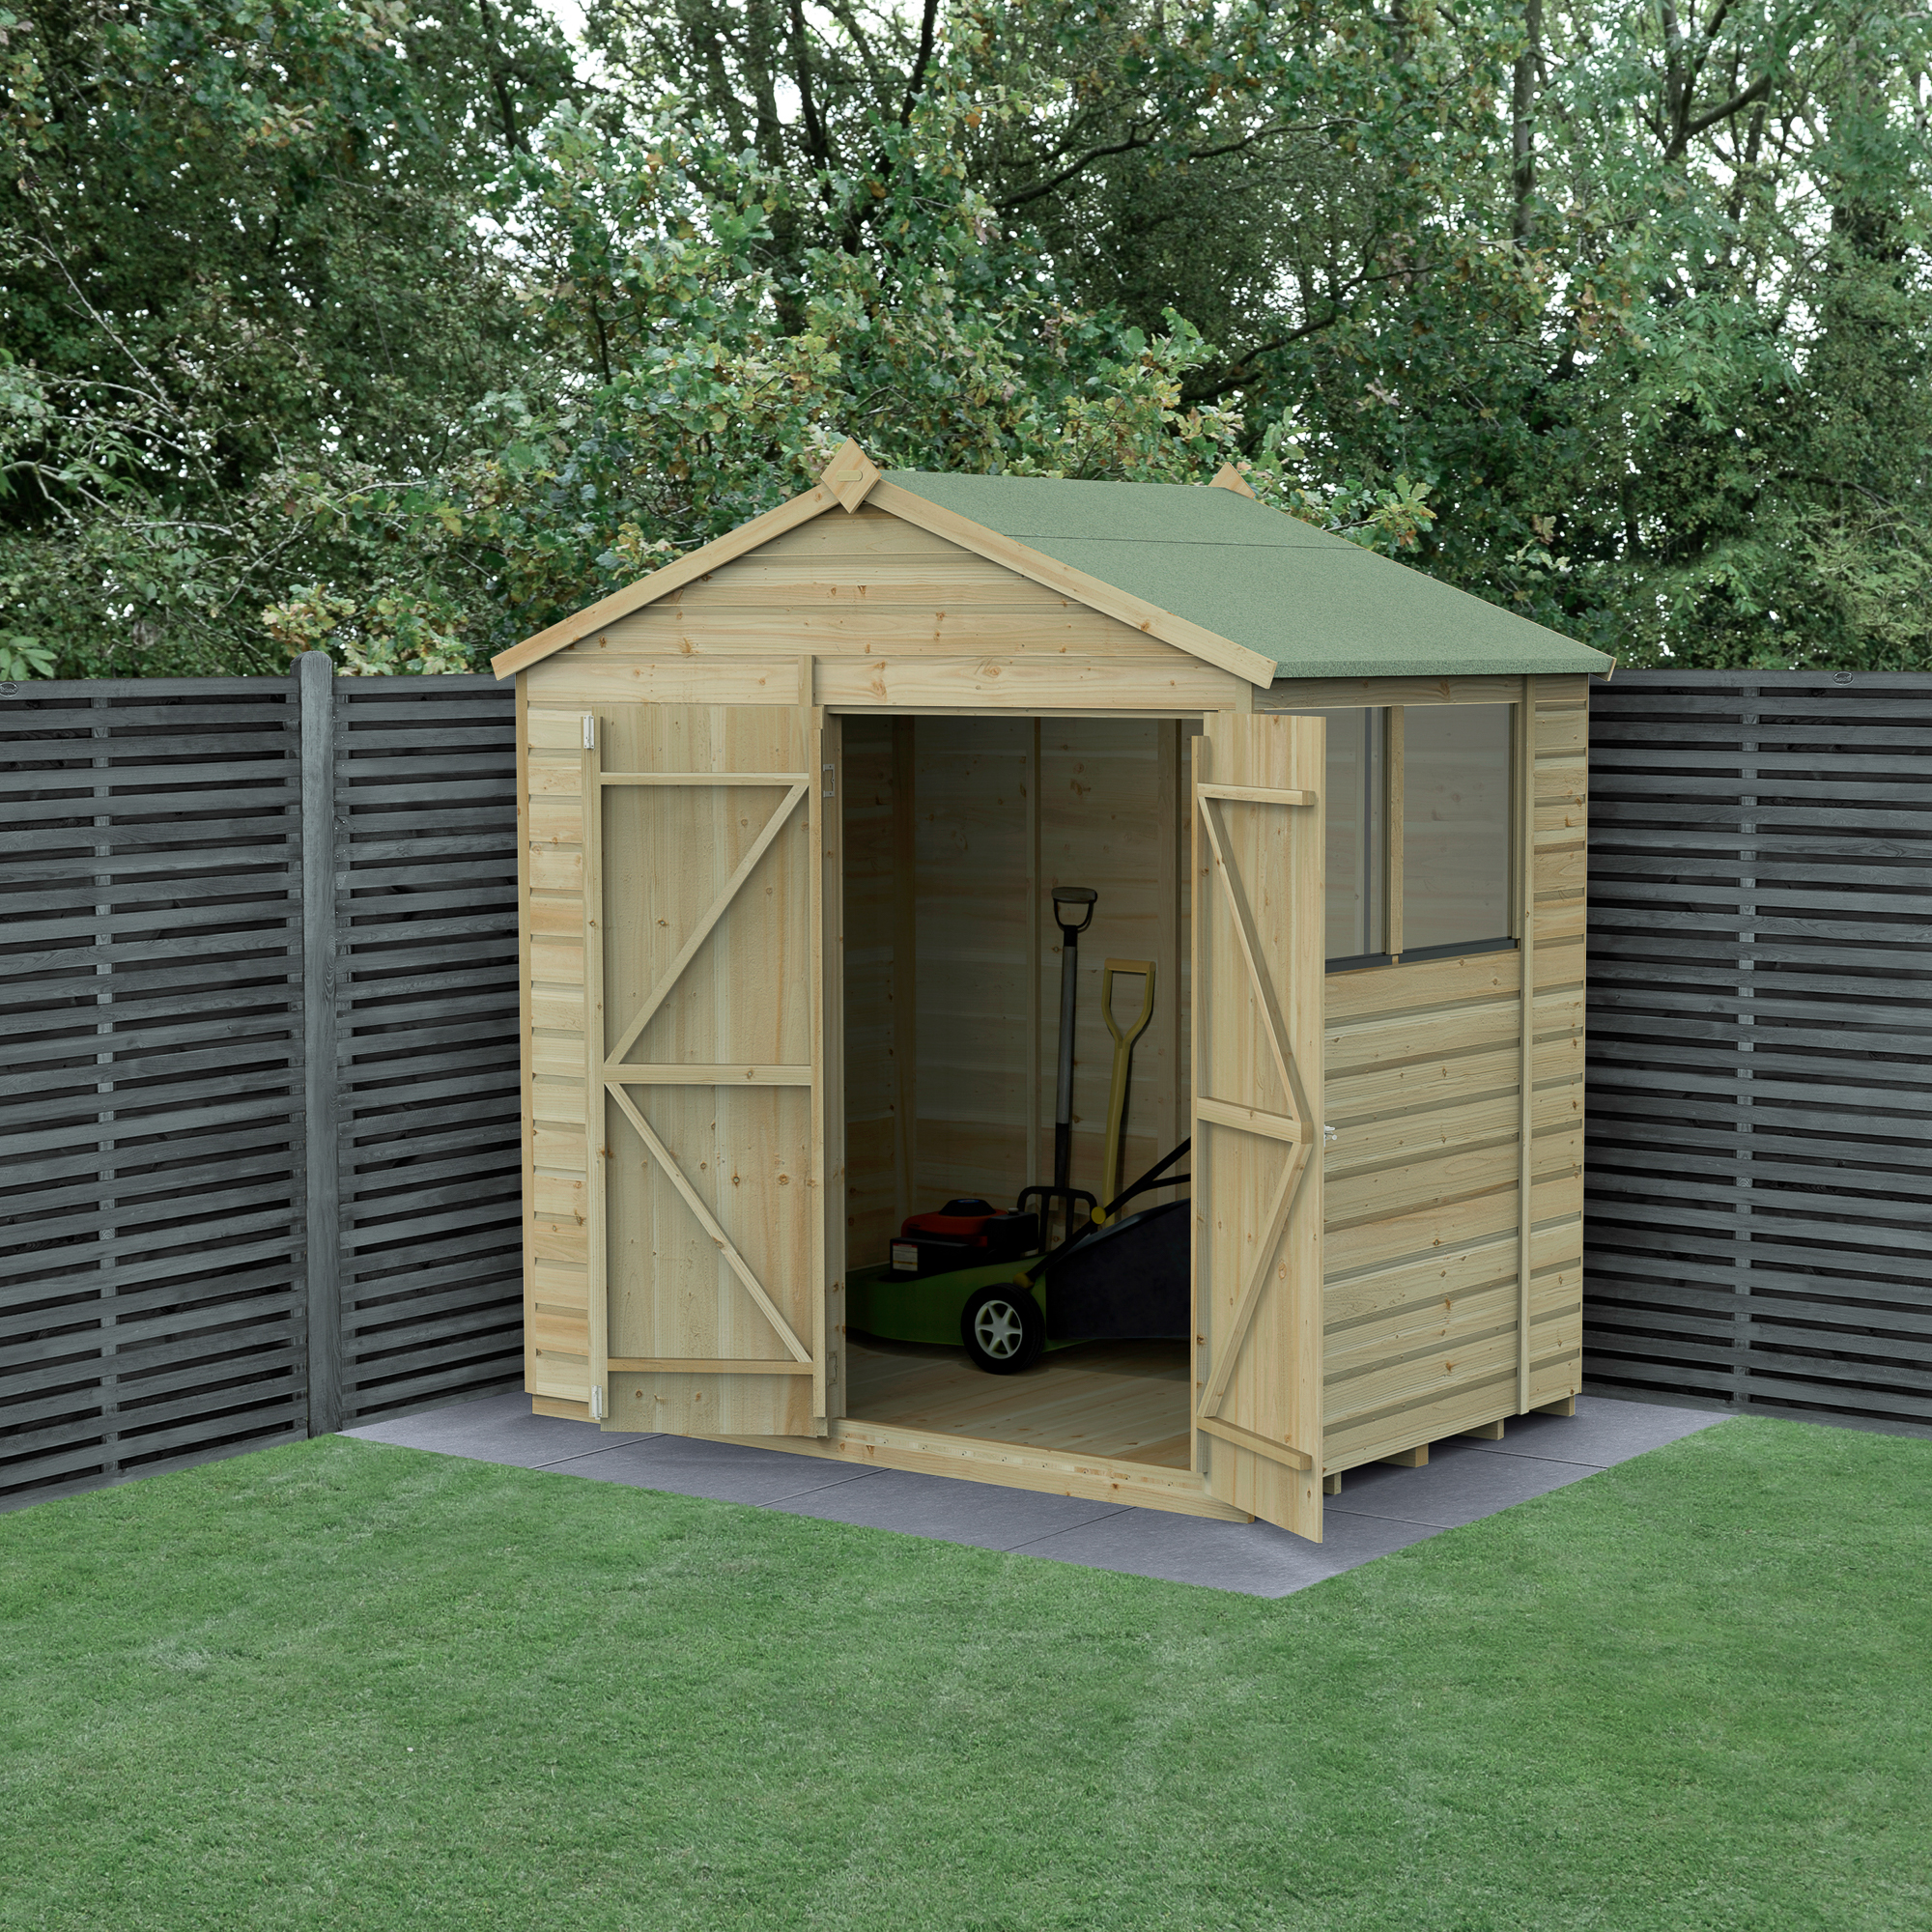 Forest Garden Beckwood 7 x 5ft Apex Shiplap Pressure Treated Double Door Shed